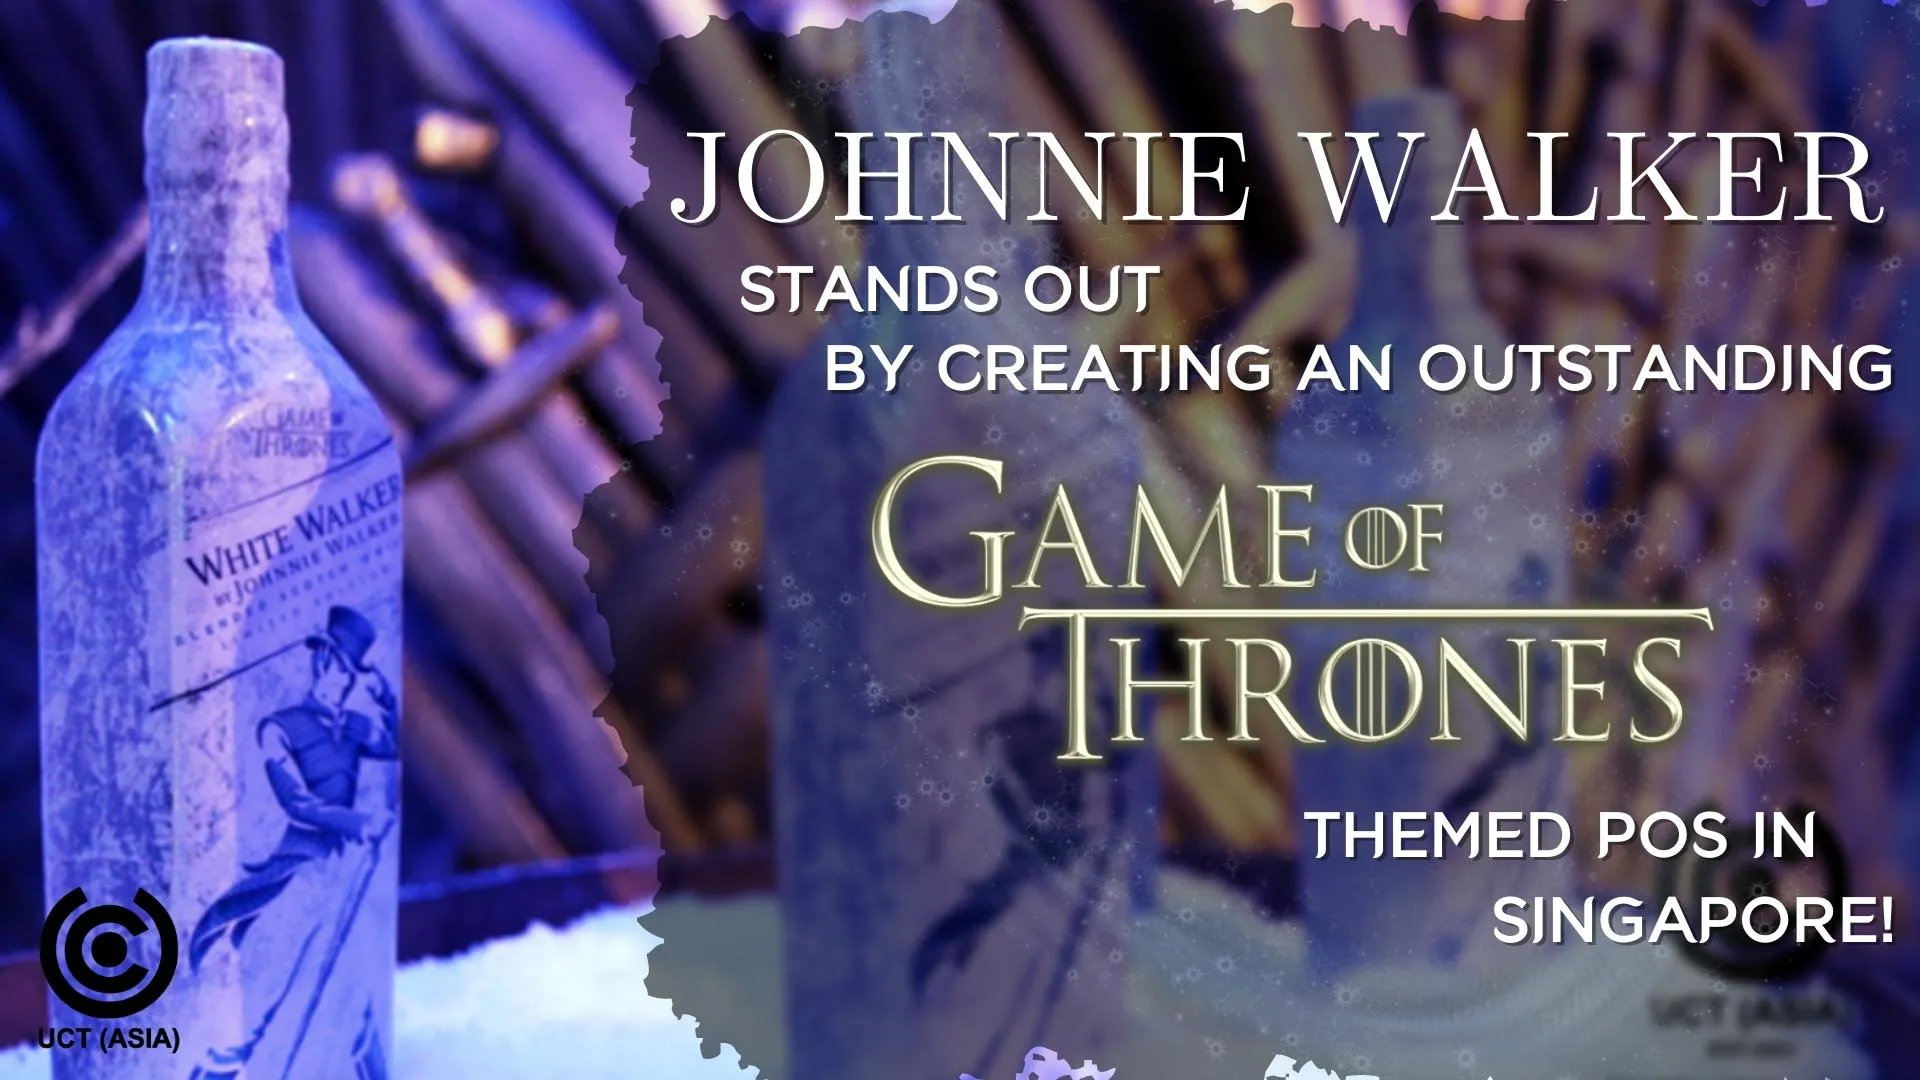 Johnnie_Walker_Stands_Out_By_Creating_An_Outstanding_Game_Of_Thrones_Themed_POS_In_Singapore